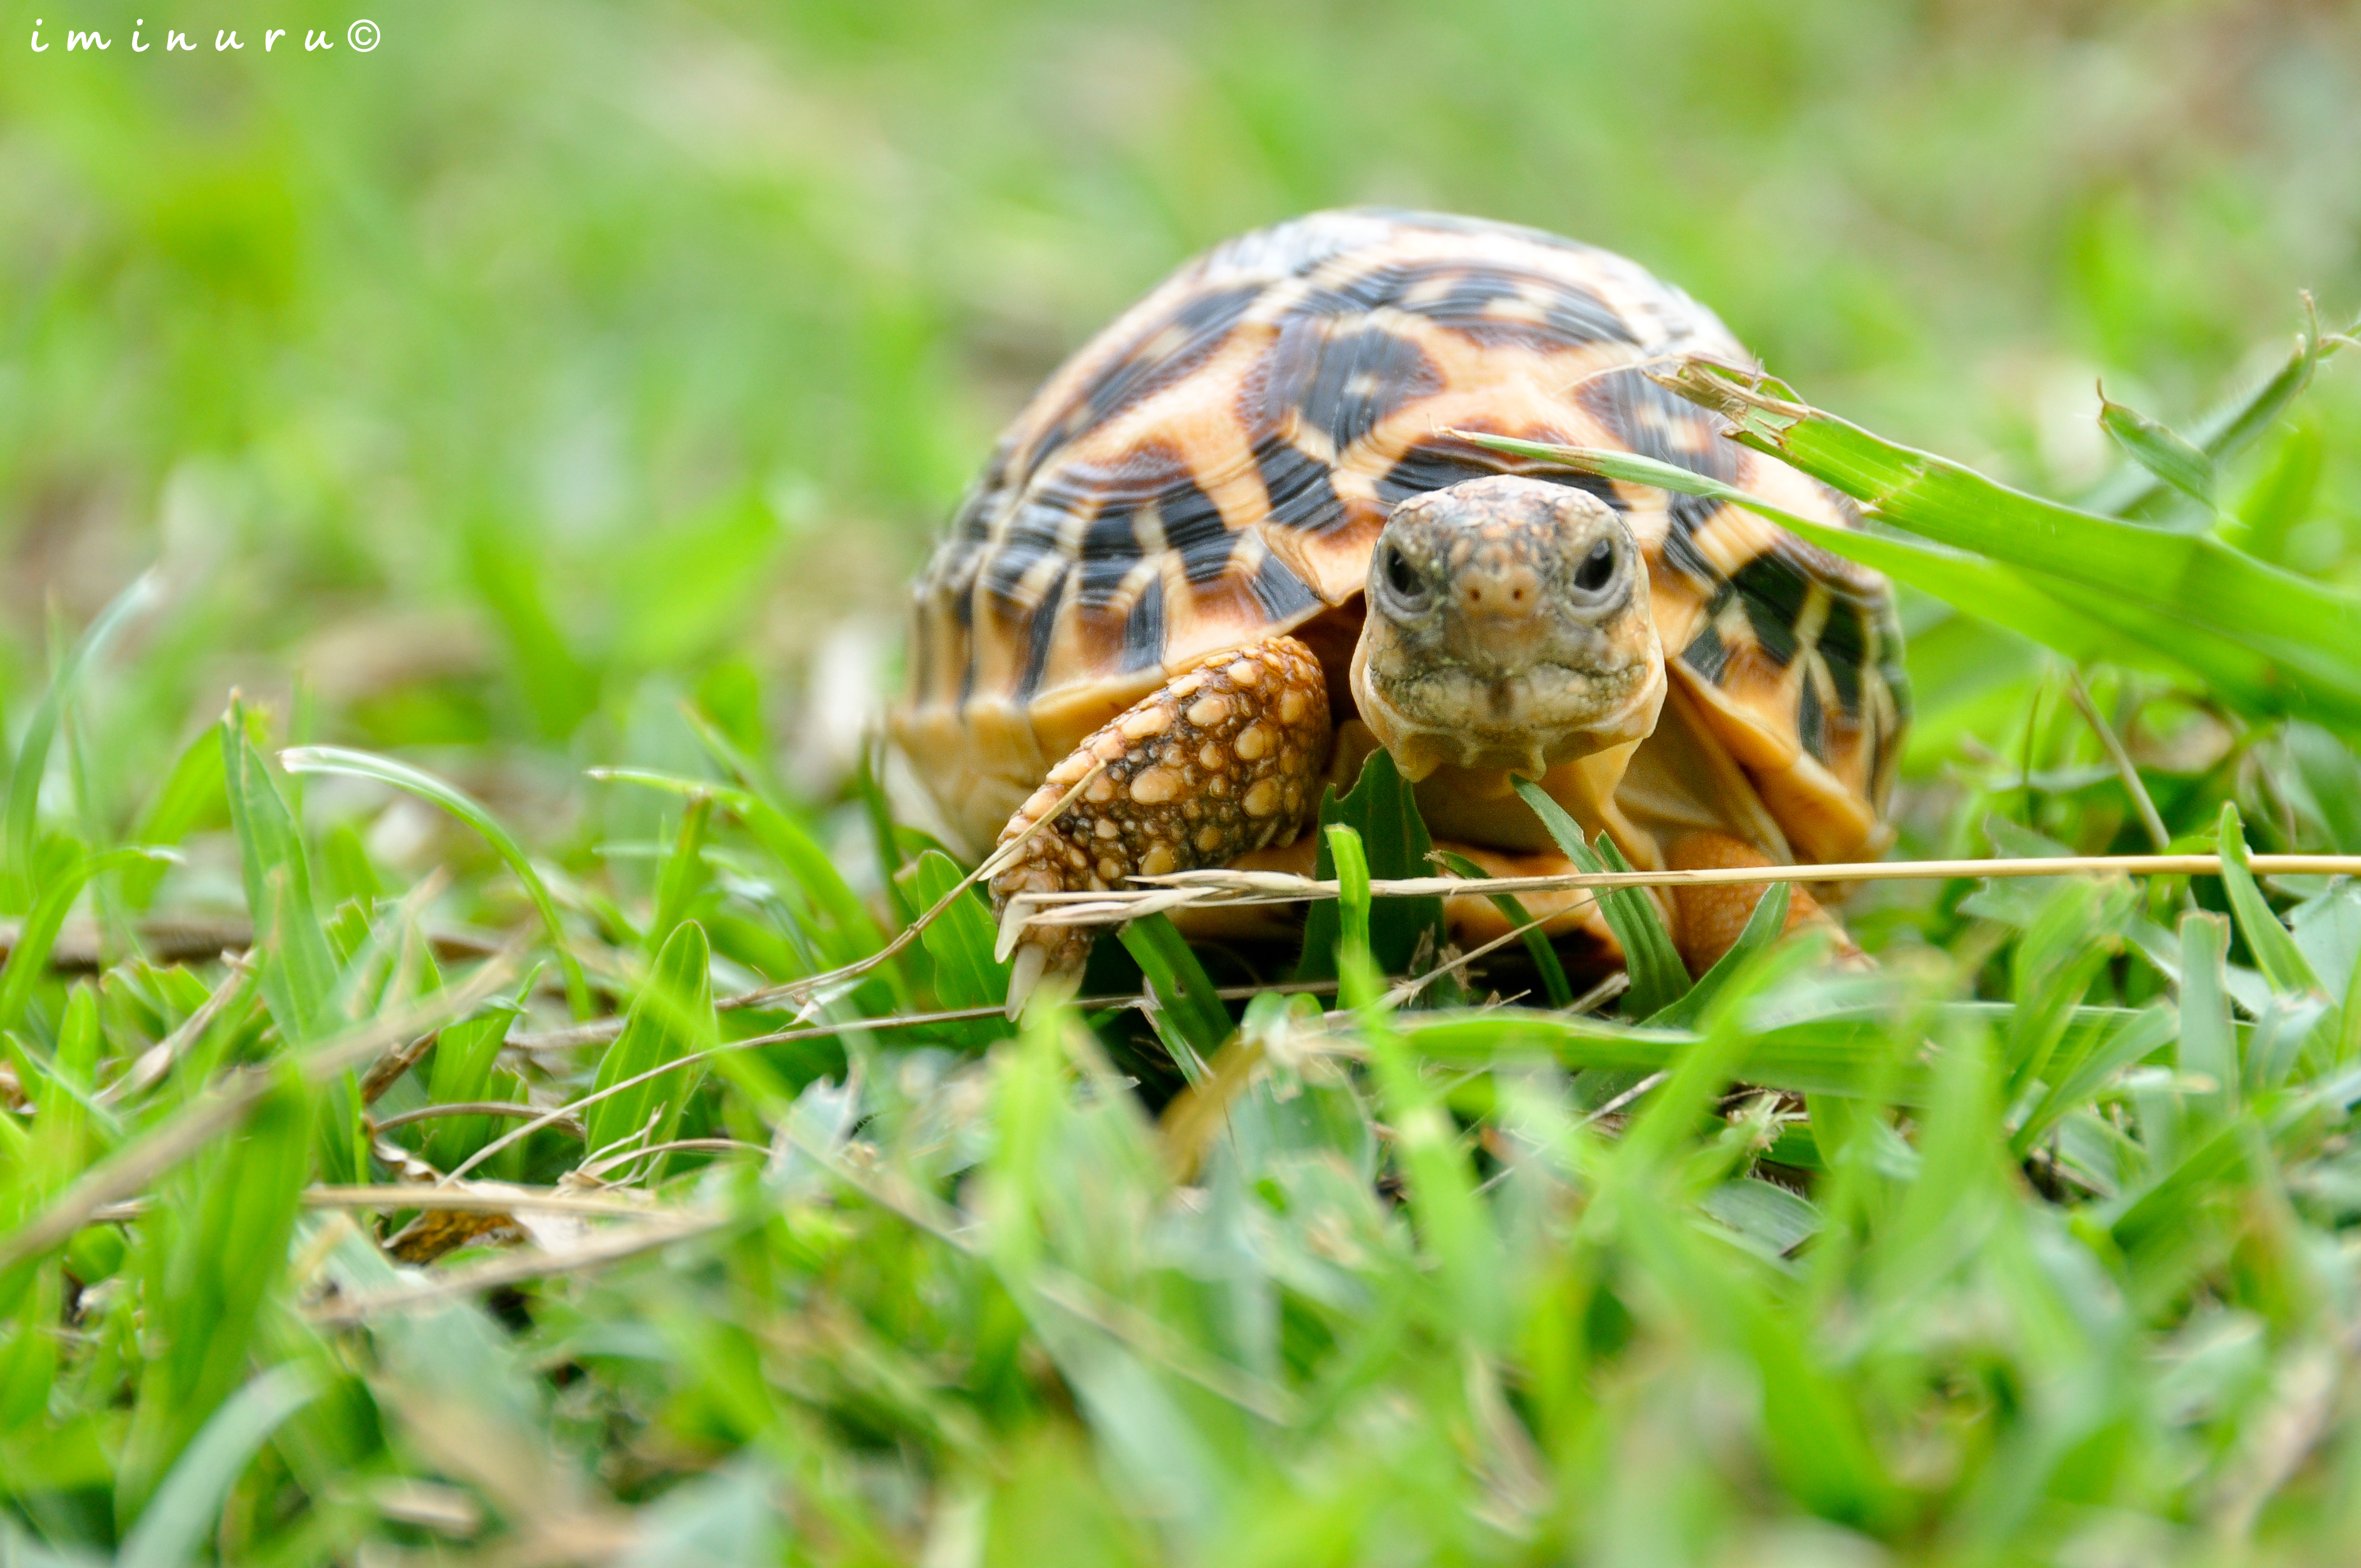 Using a Tortoise In Your Home Decor Brings Prosperity and Luck.